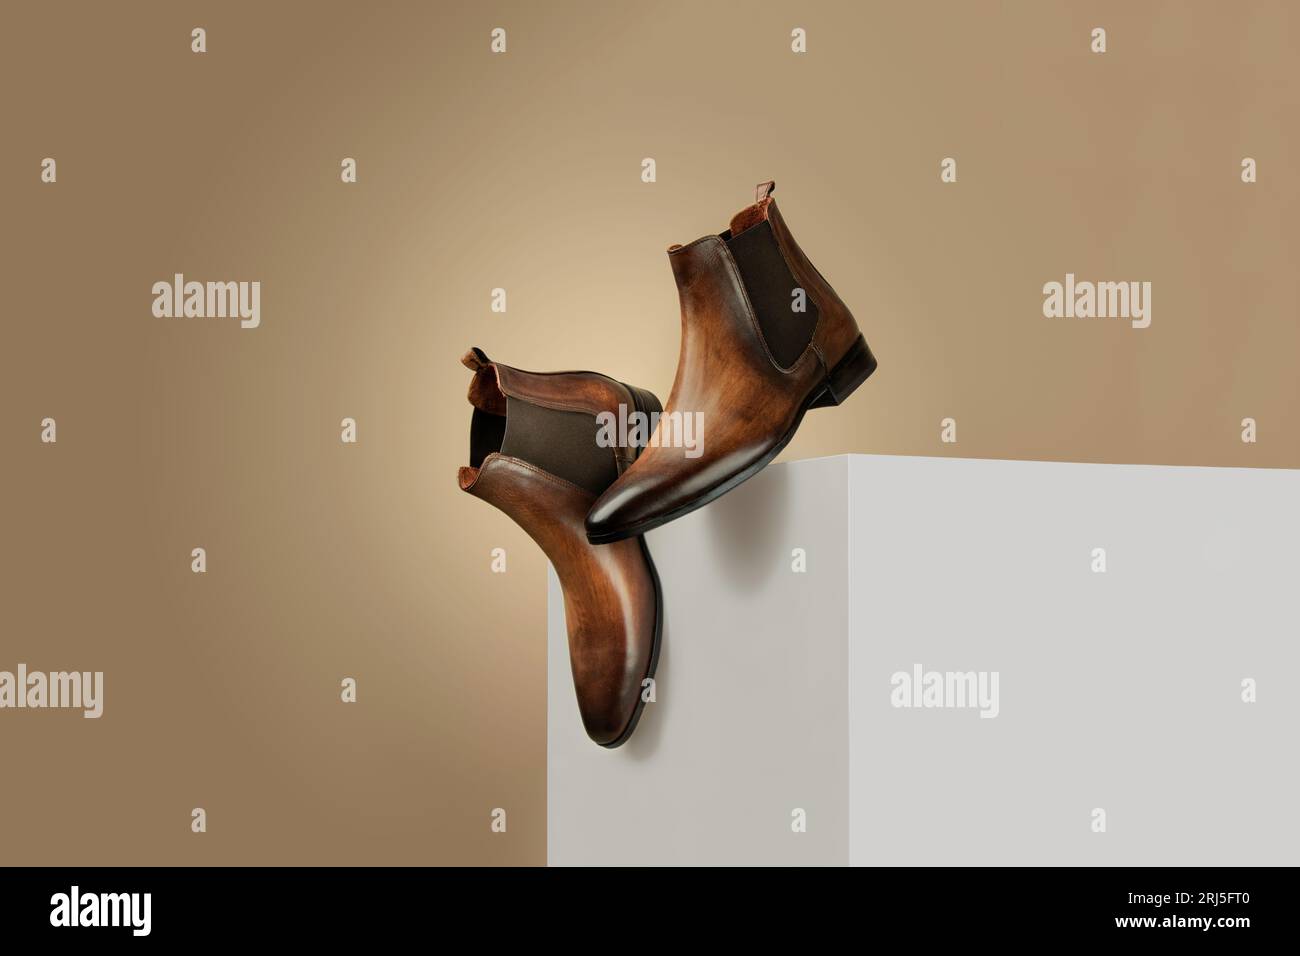 A pair of brown leather boots on a white platform about to fall. Stock Photo